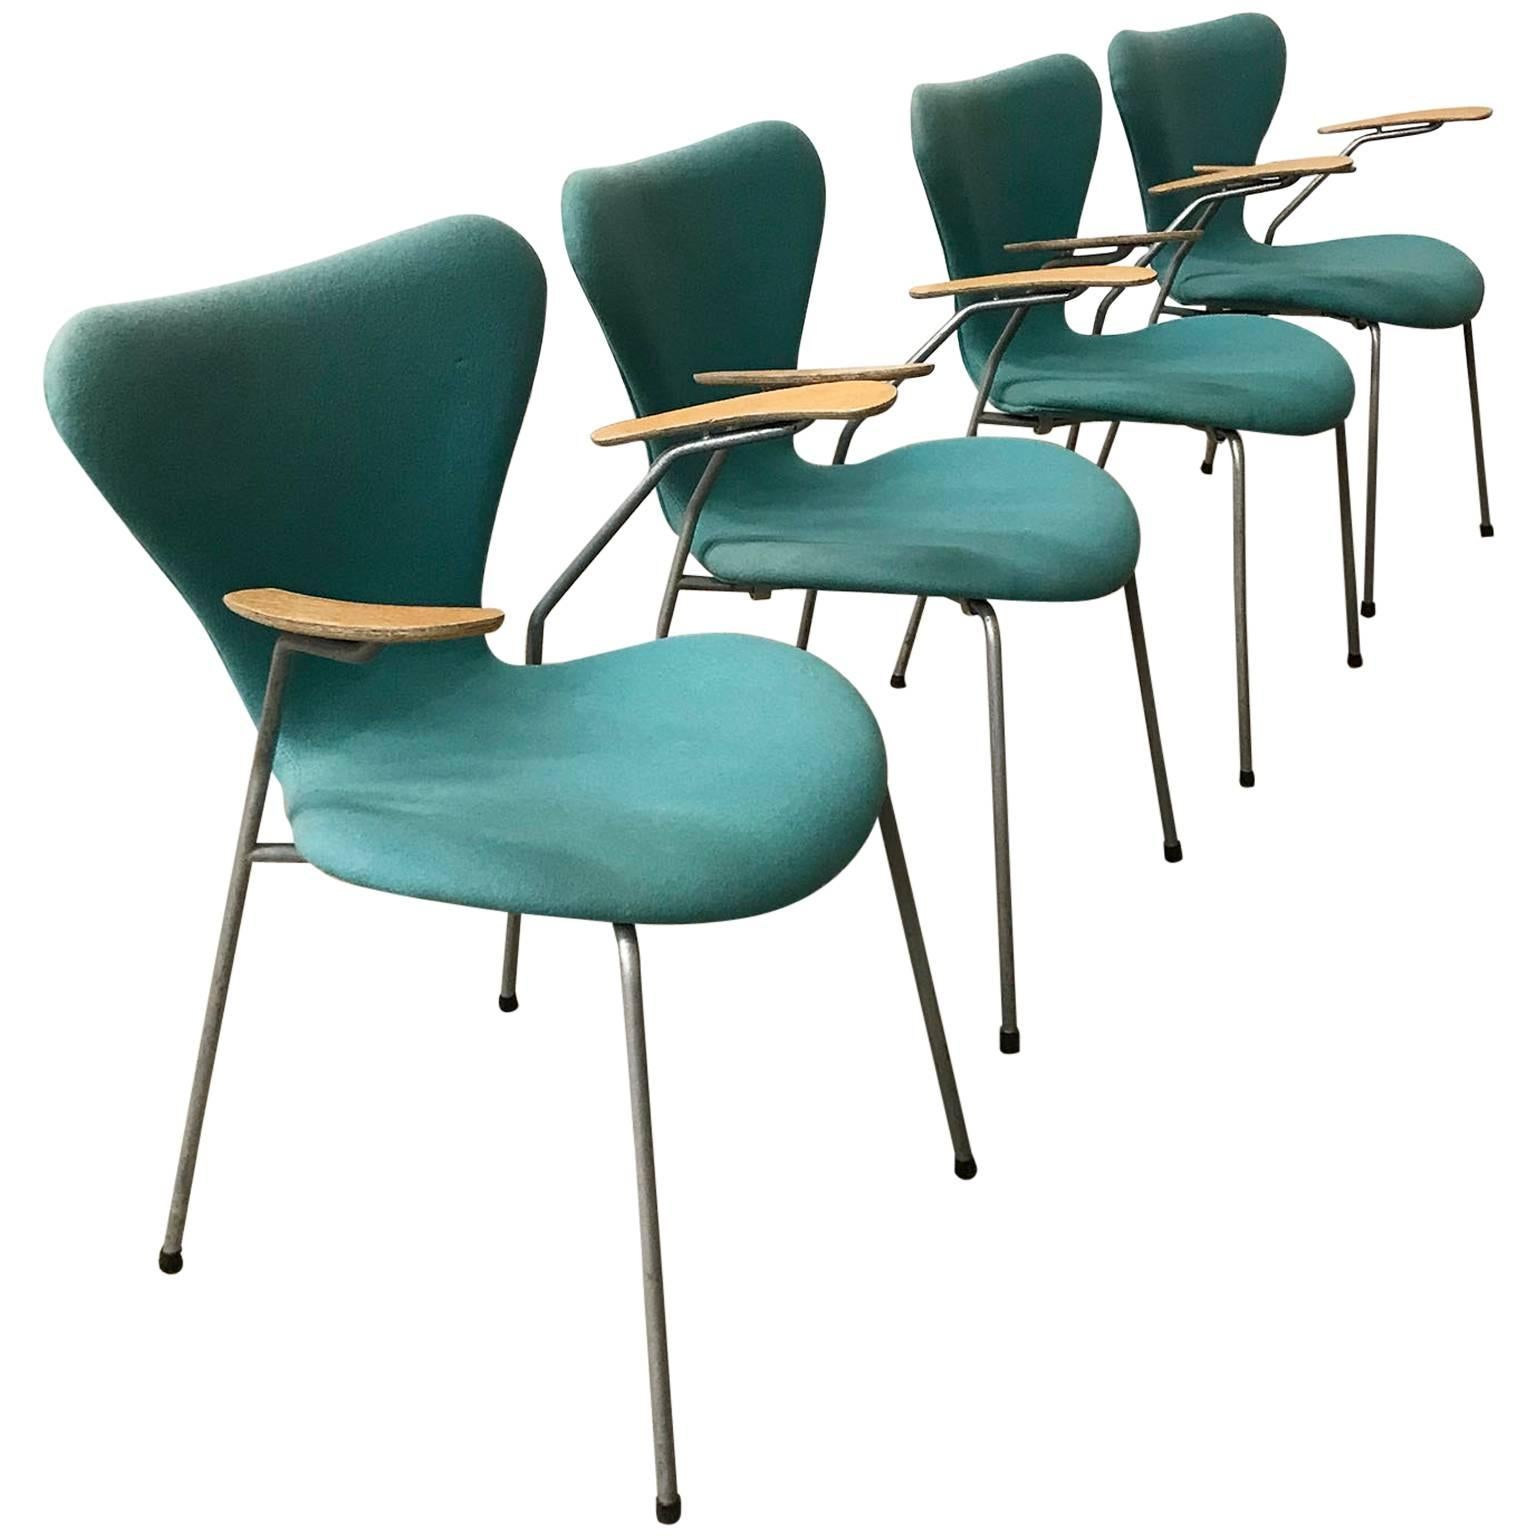 1955, Arne Jacobsen, Set of Four Turquoise Upholstered 3207 Butterfly Armchairs